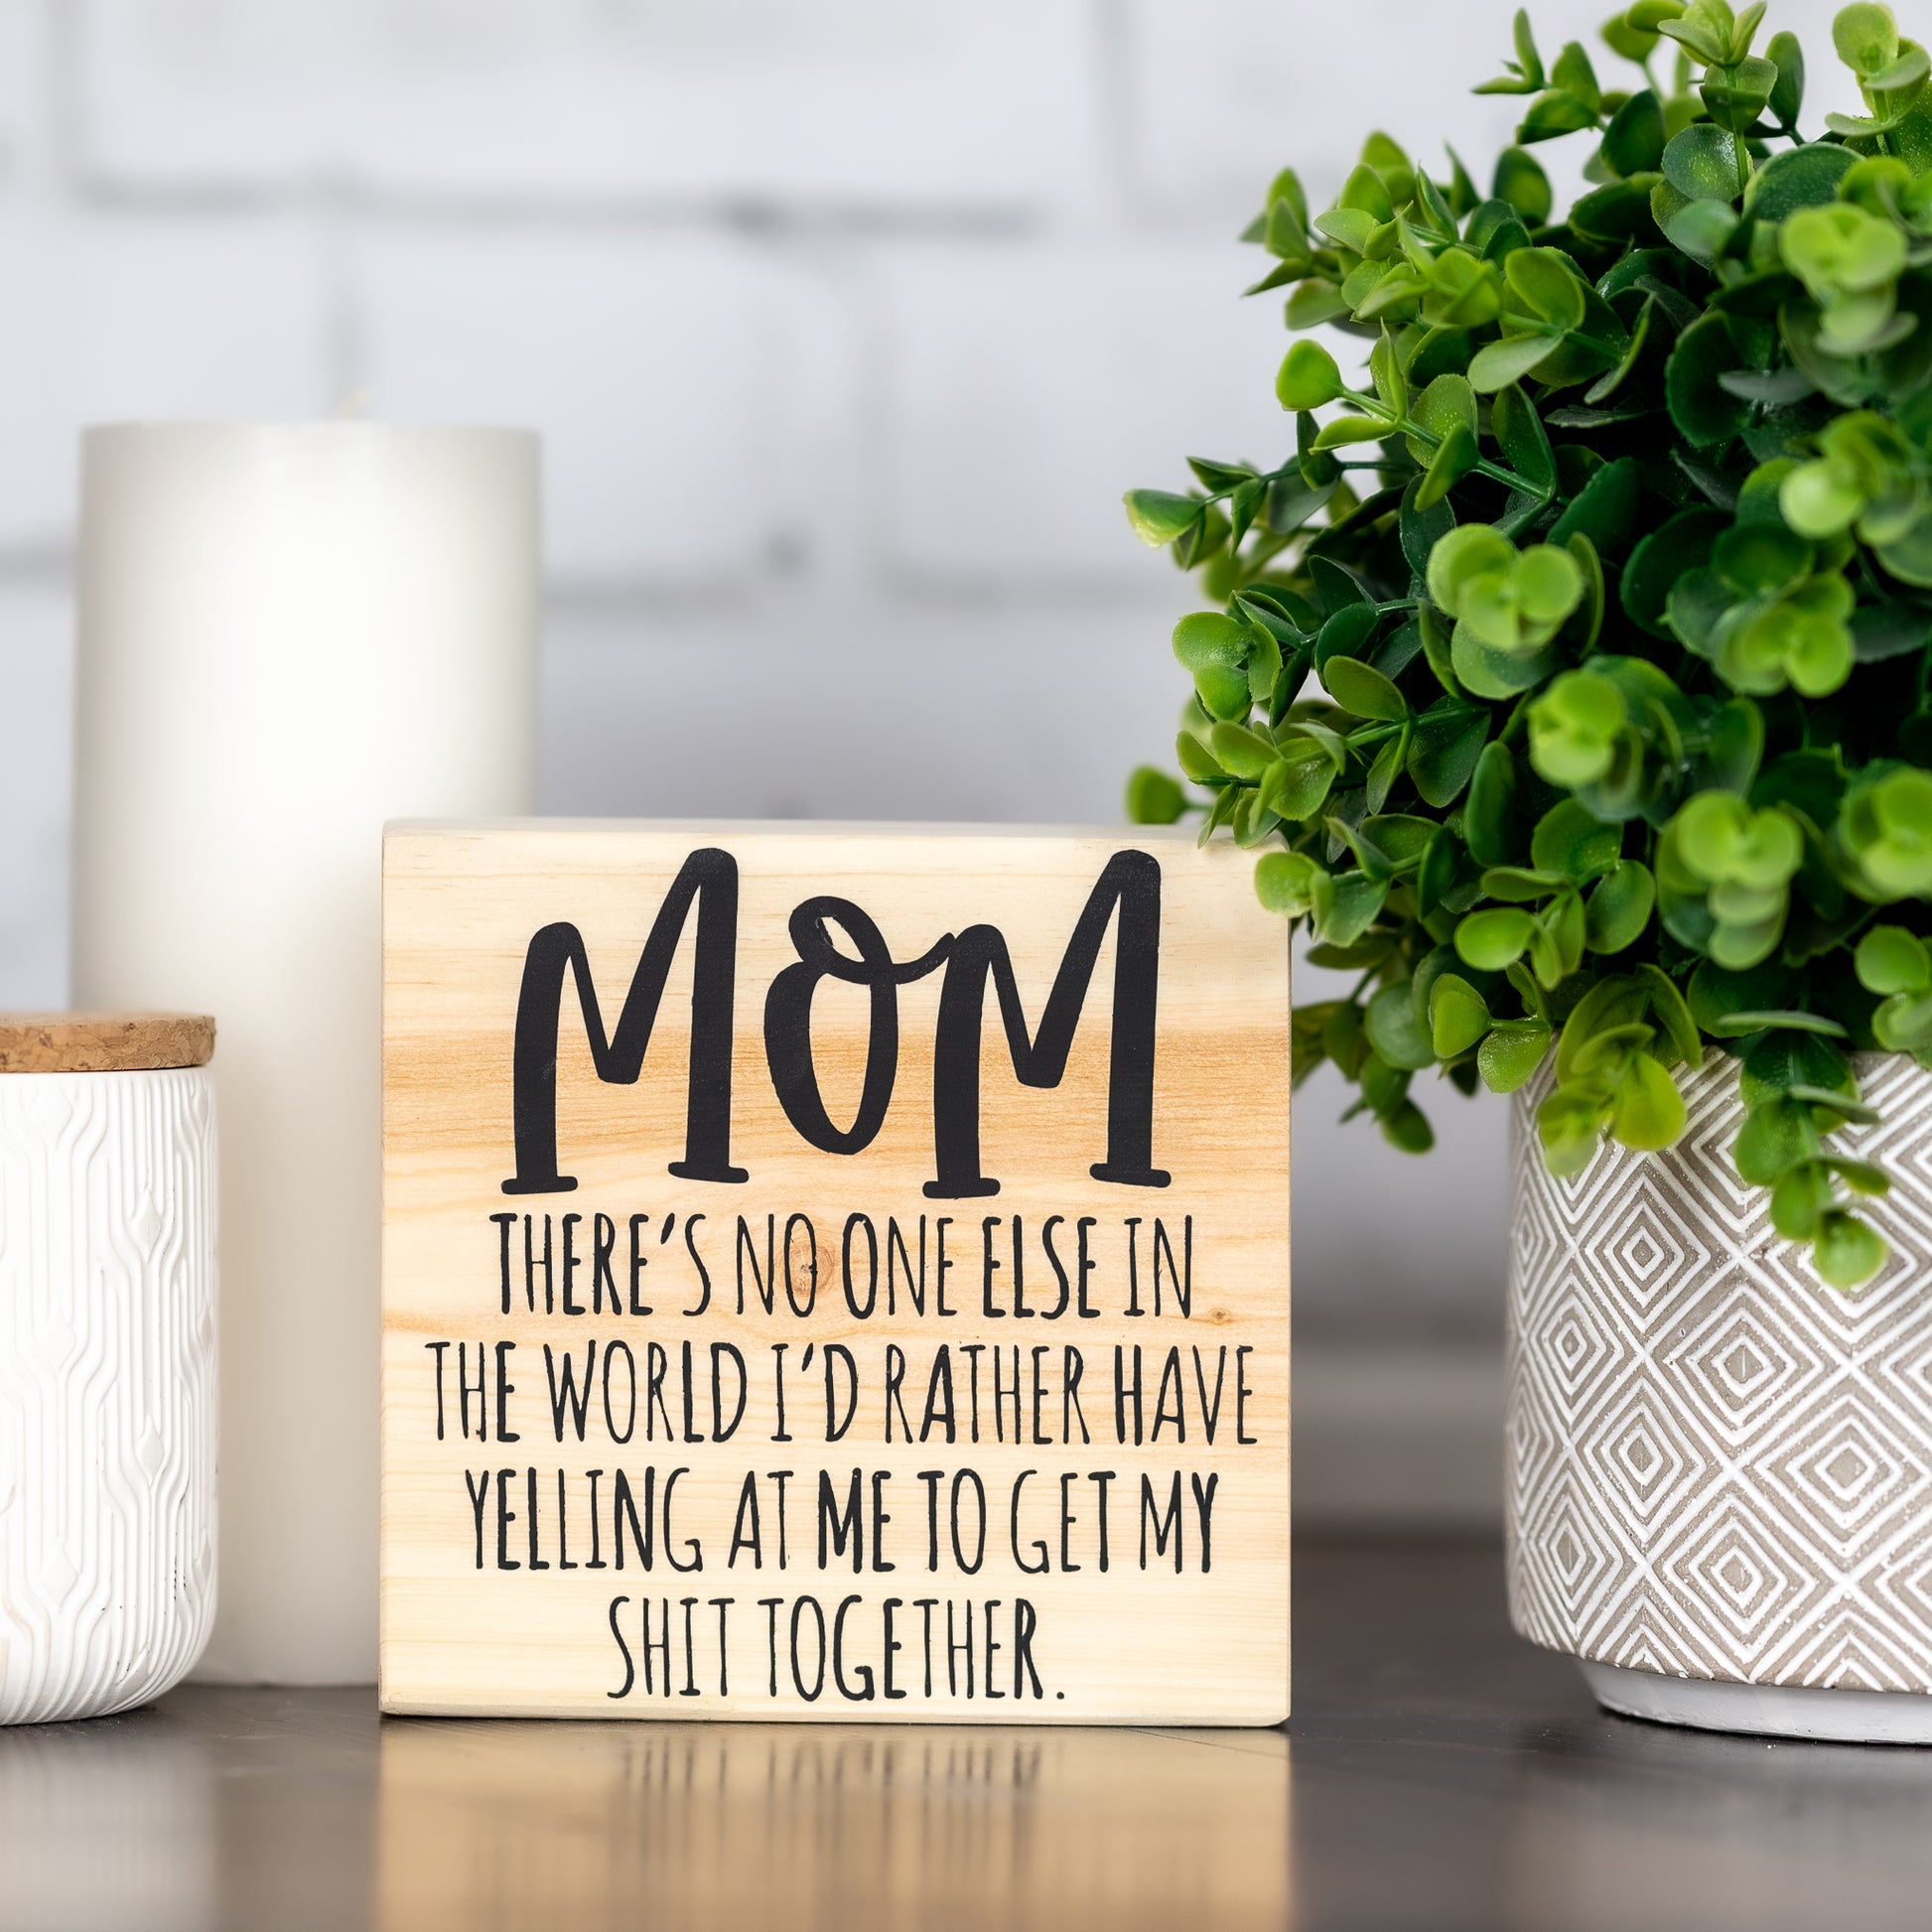 mom there is no one else in the world I'd rather have yelling at me to get my shit together ~ shelf block sign